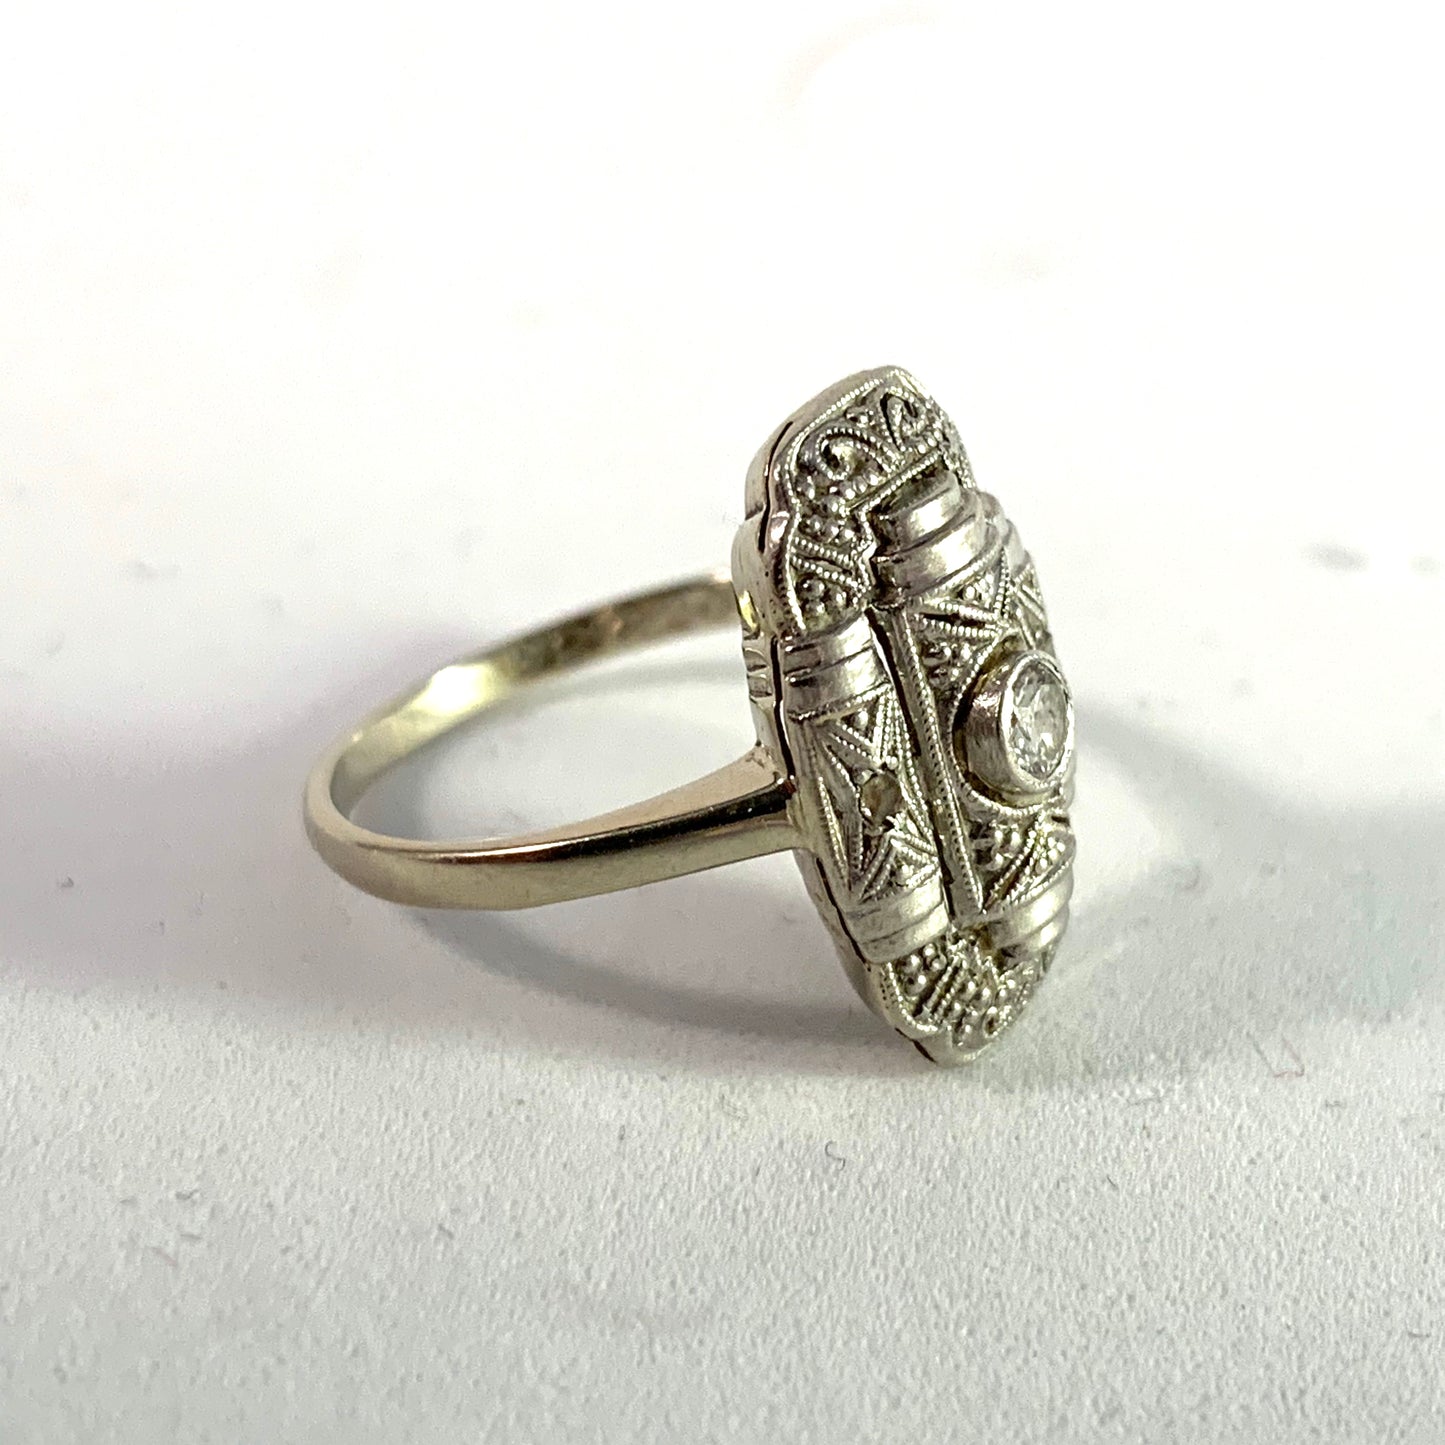 Sweden 1936 Art Deco 18k Gold Old Cut and Rose Cut Diamond Ring.